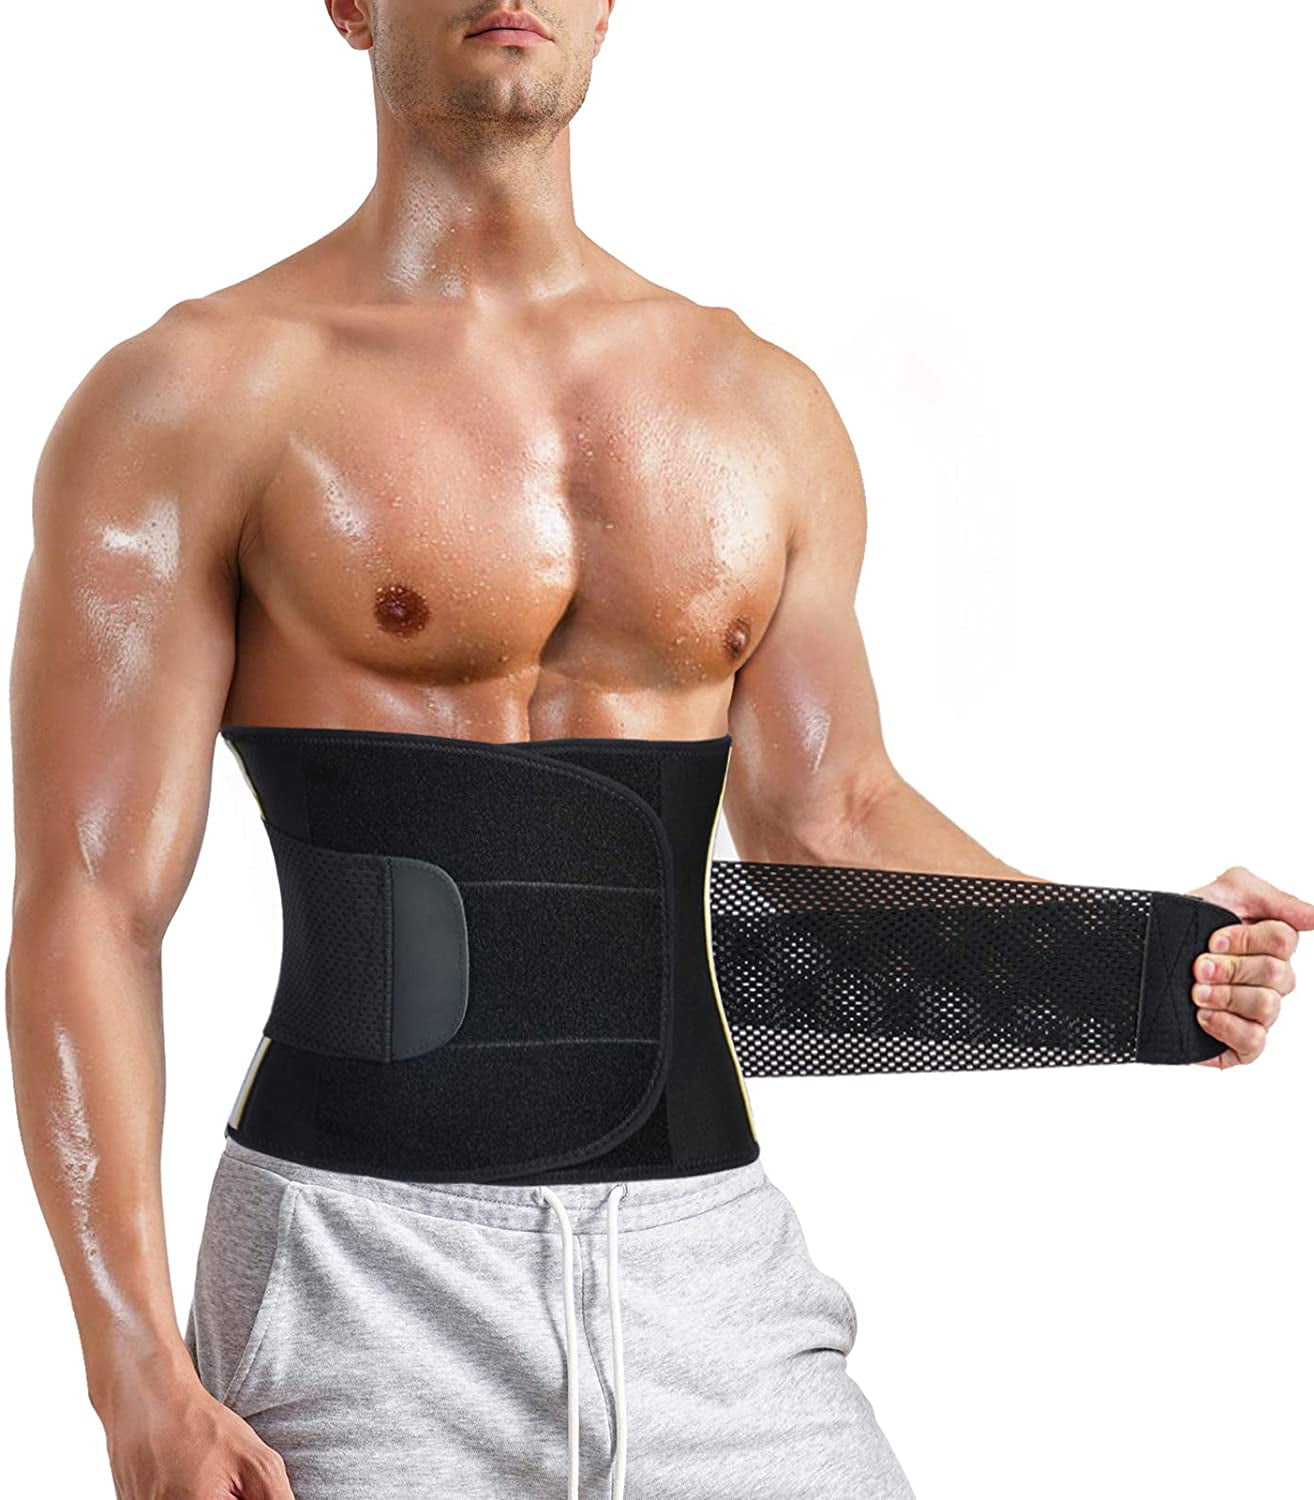 One-Size Fits All Up To 50inch Waist Belly Burner Weight Loss Belt Black 